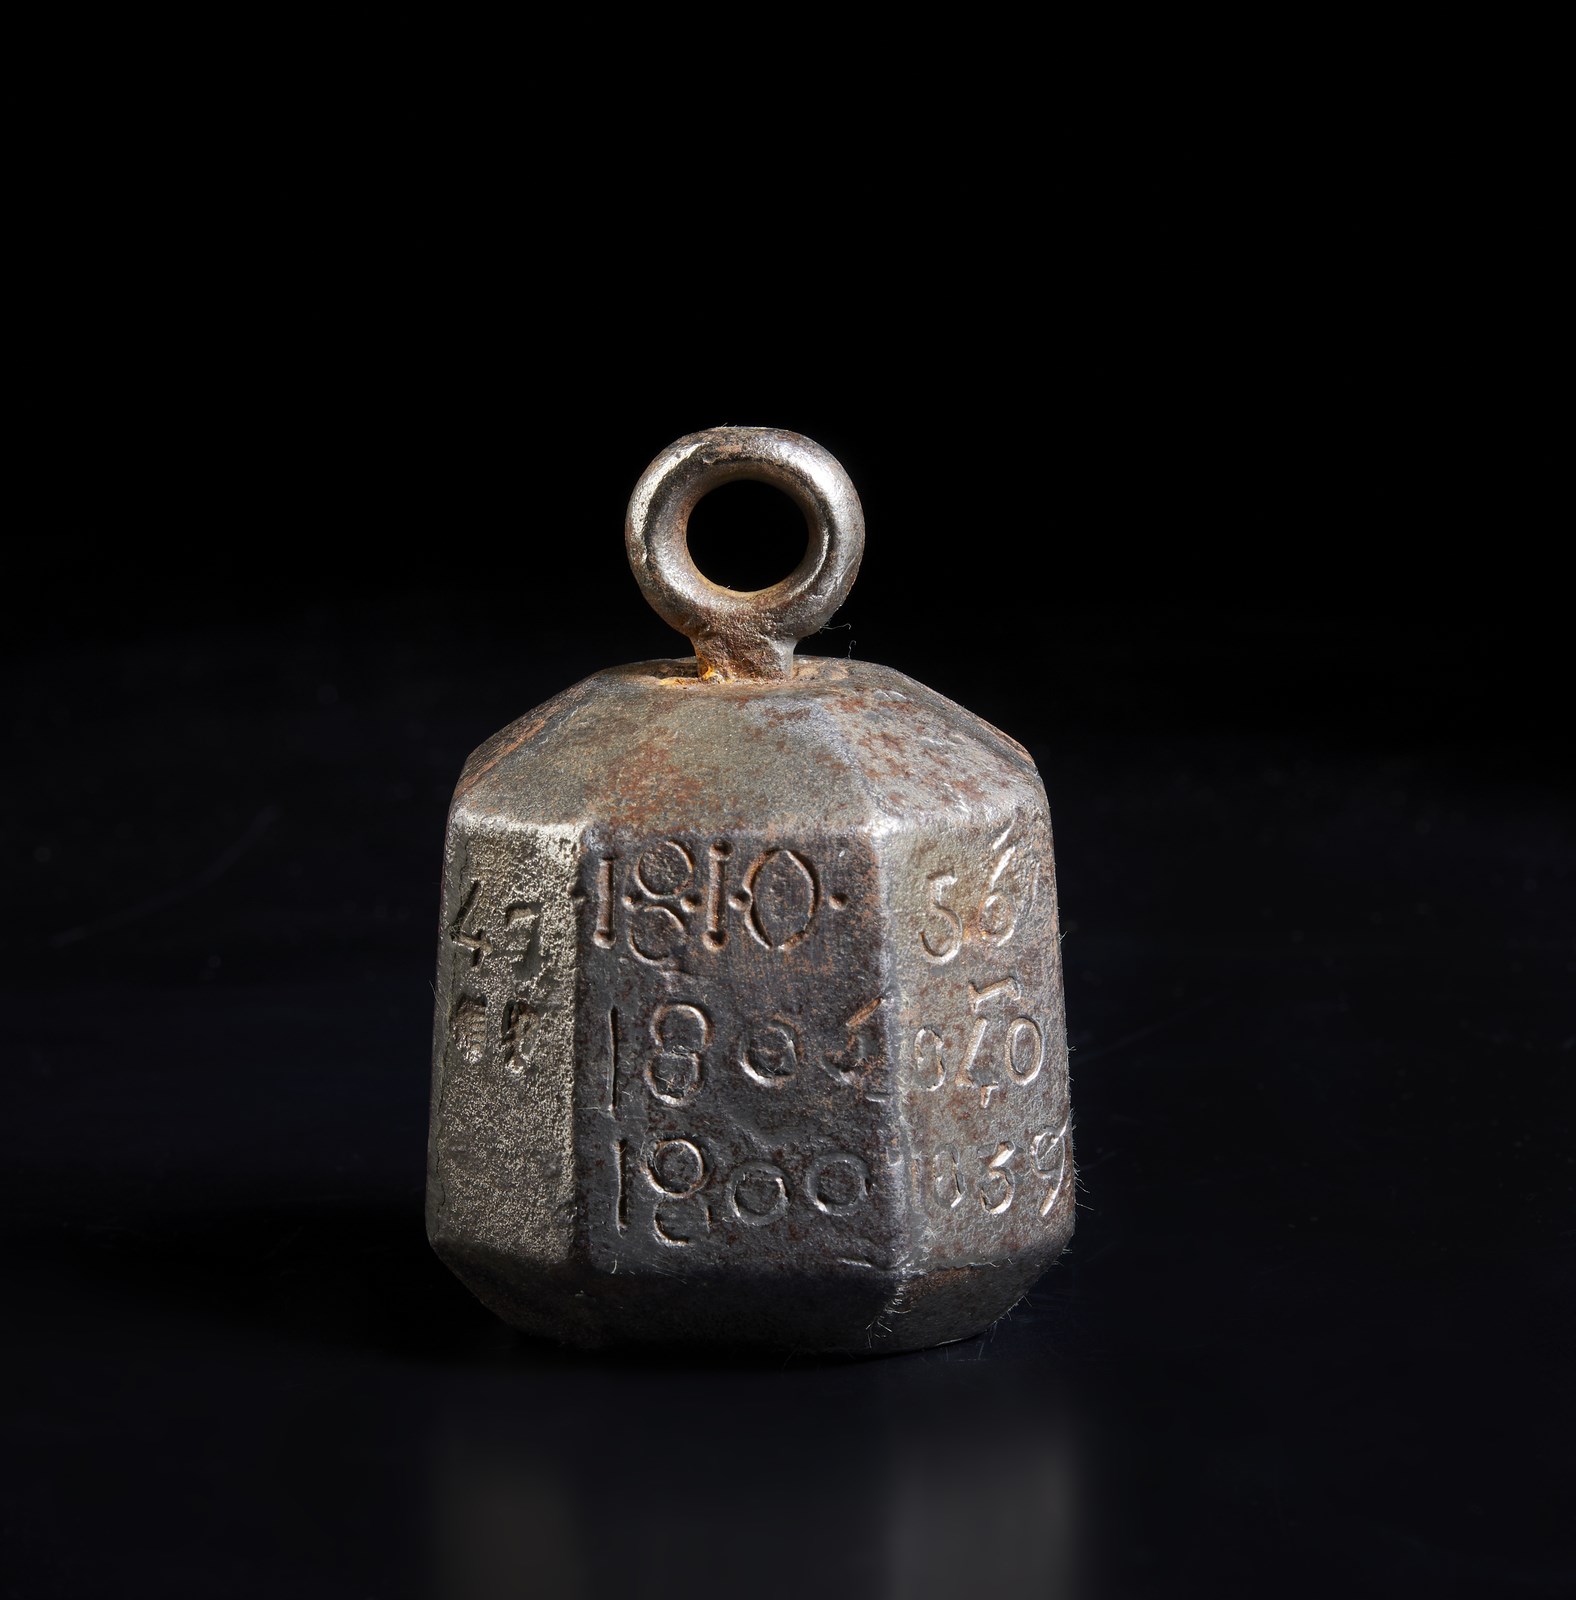 Ancient balance weight
Italy, 18th century (. )